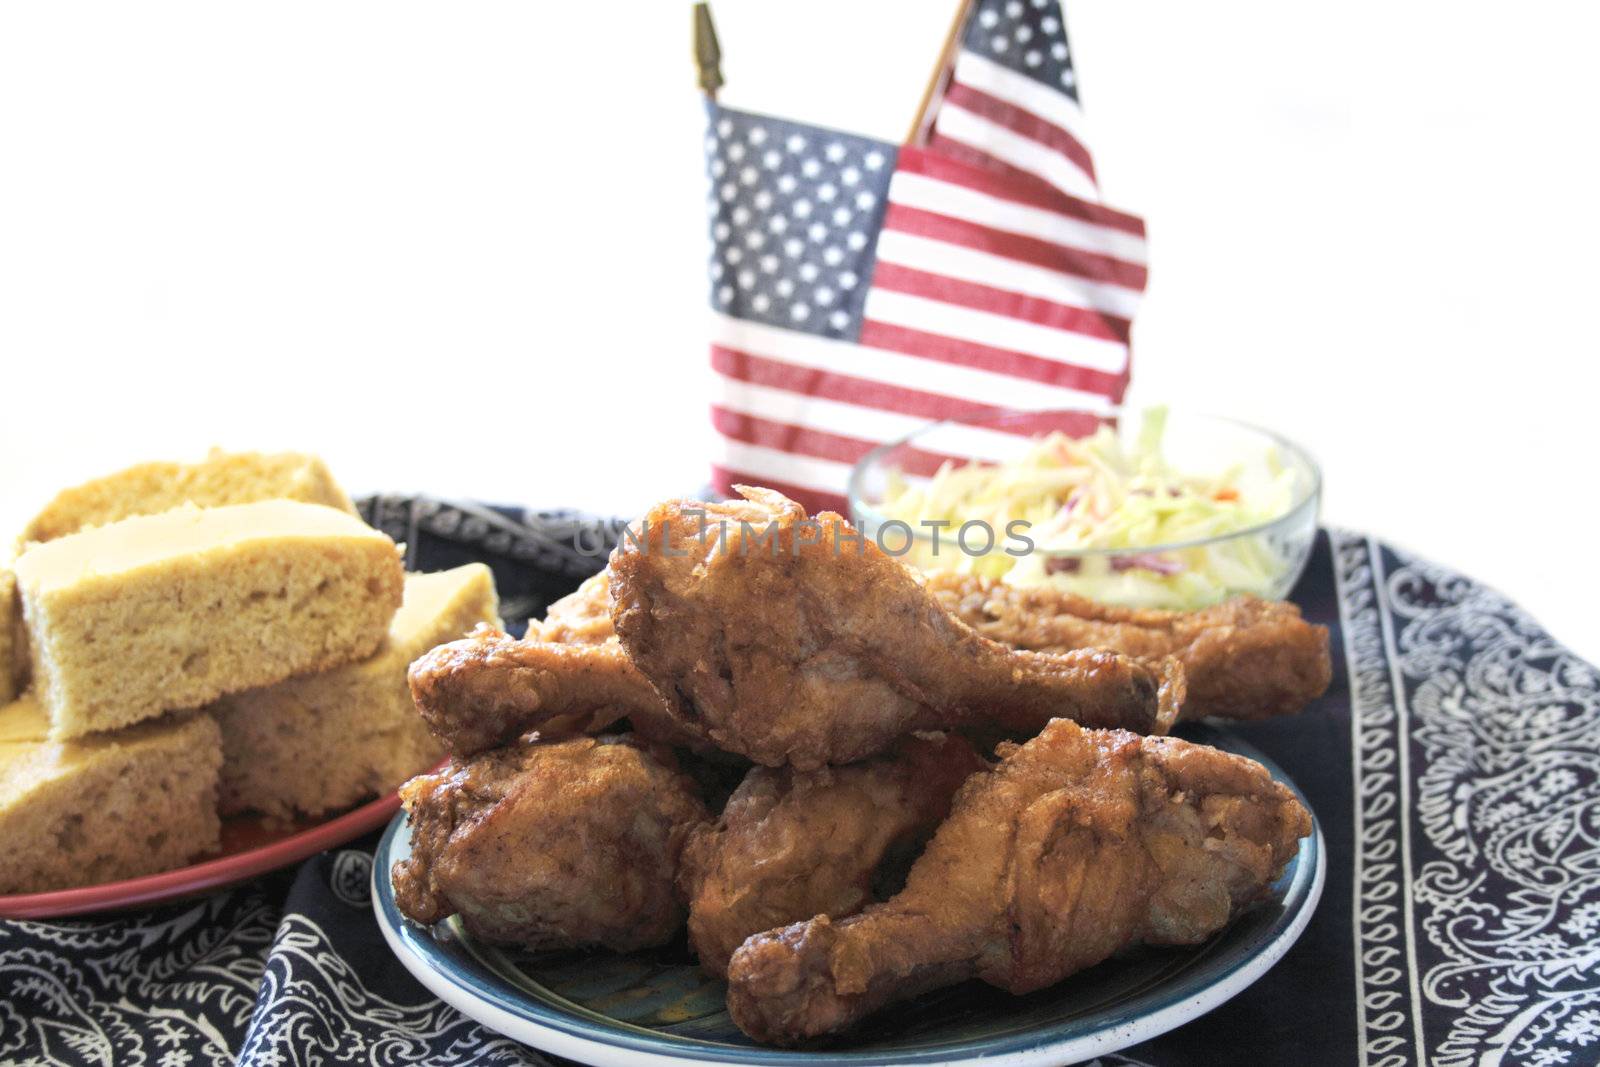 fried chicken legs, cornbread, and coleslaw on a dark blue bandana for a holiday picnic